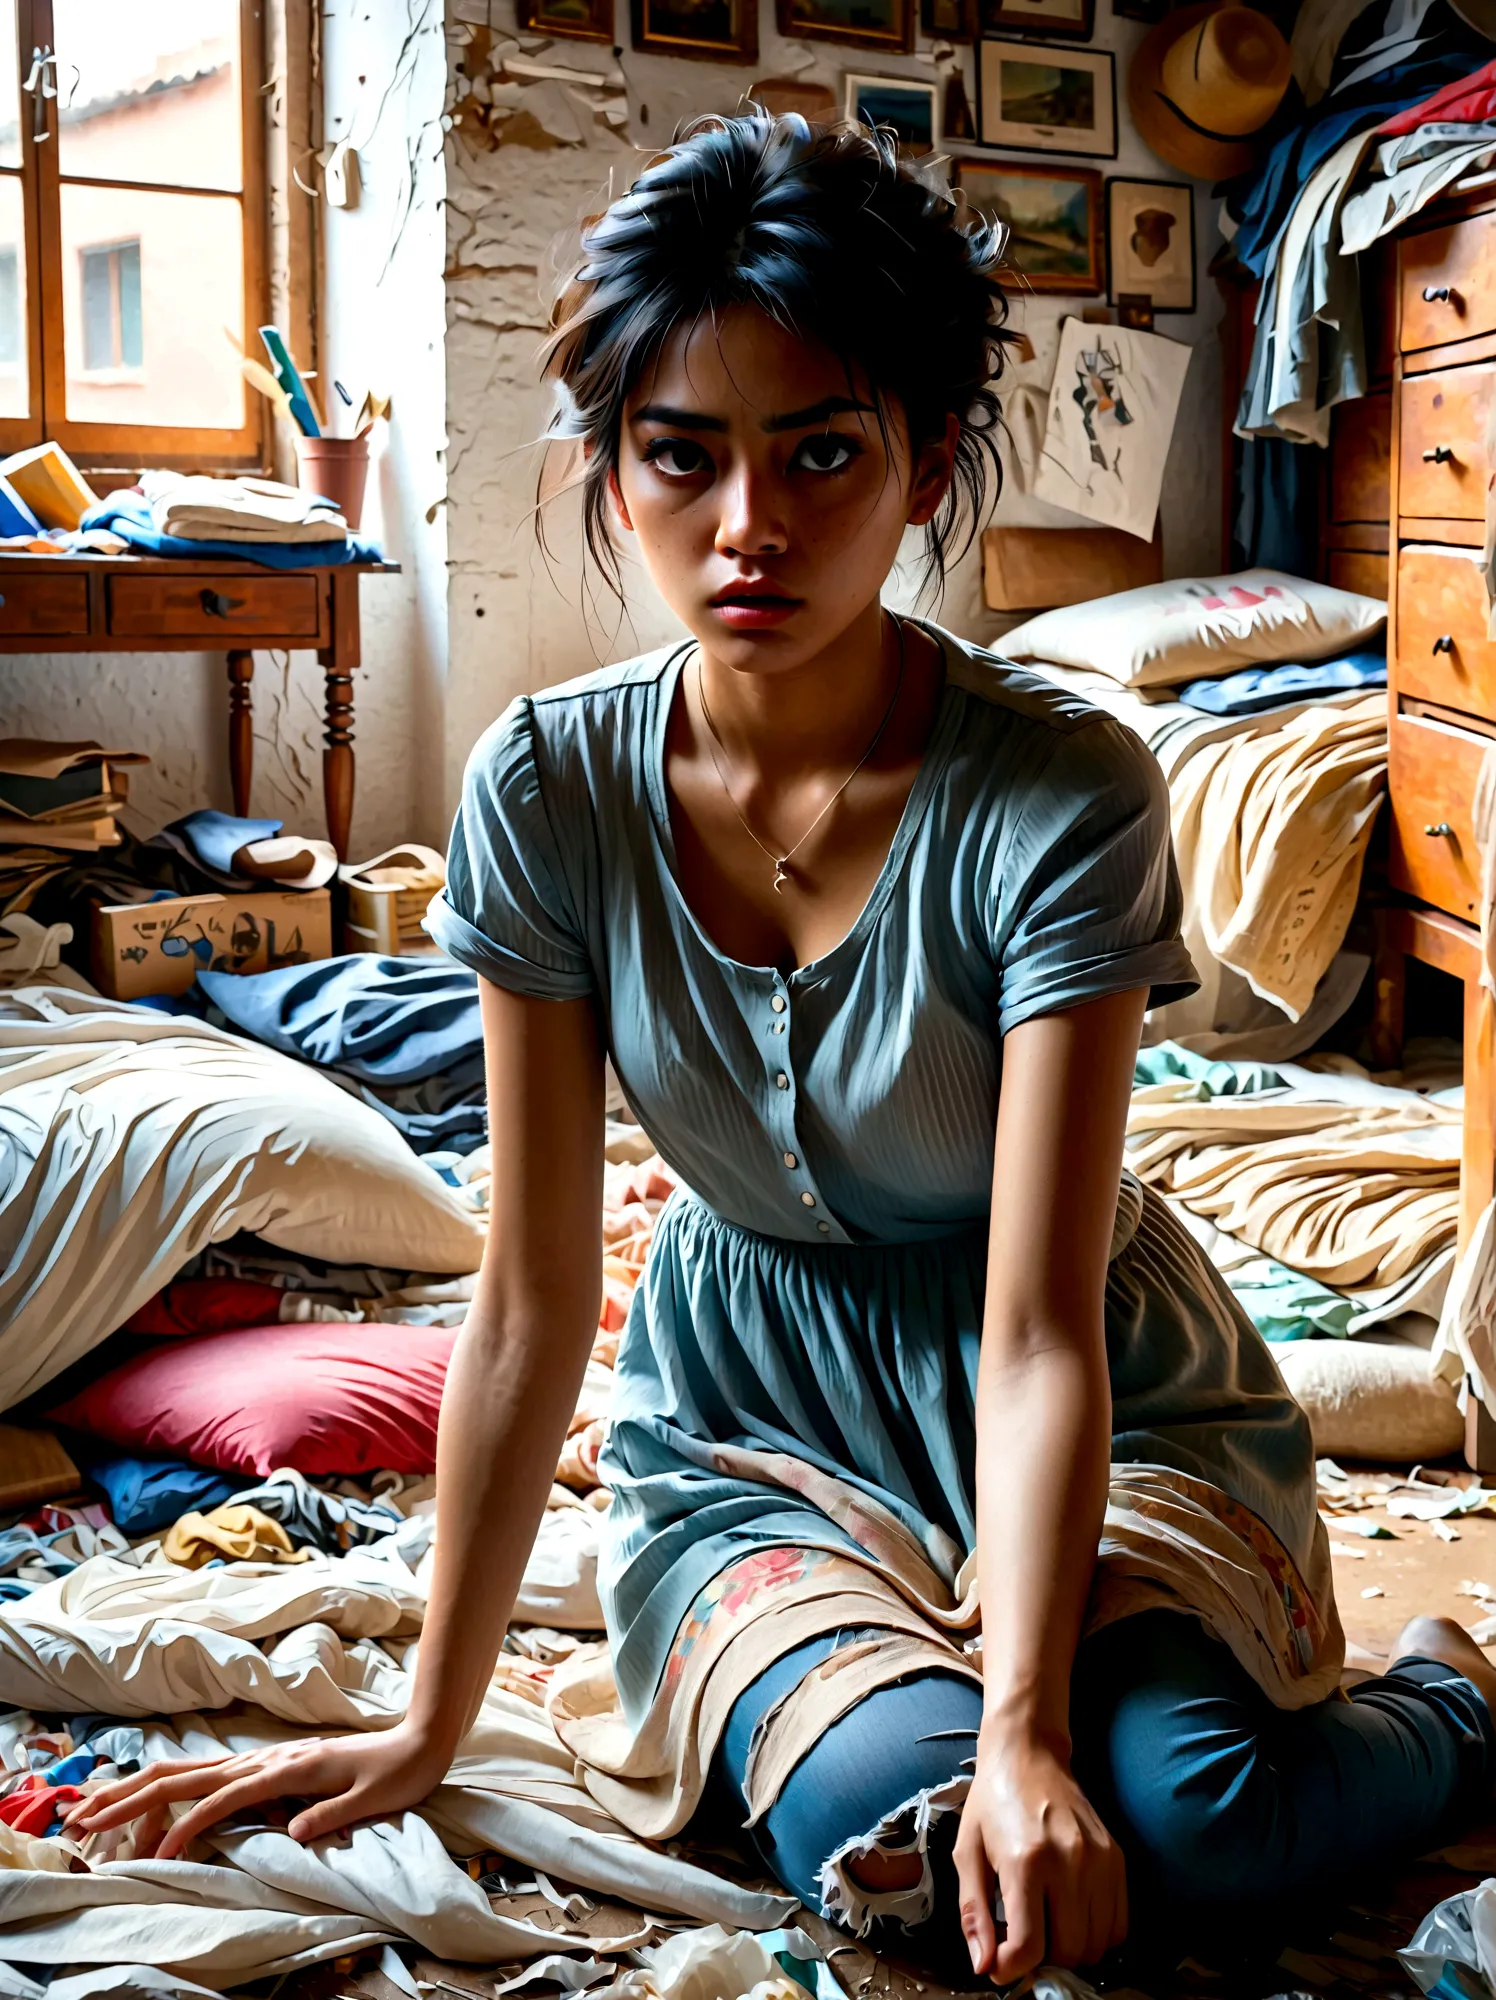 (a young girl with a disgusted expression), (Disgusted look:1.5), Messy hair, Sweating, Cleaning a messy room, dust, cobwebs, A ...